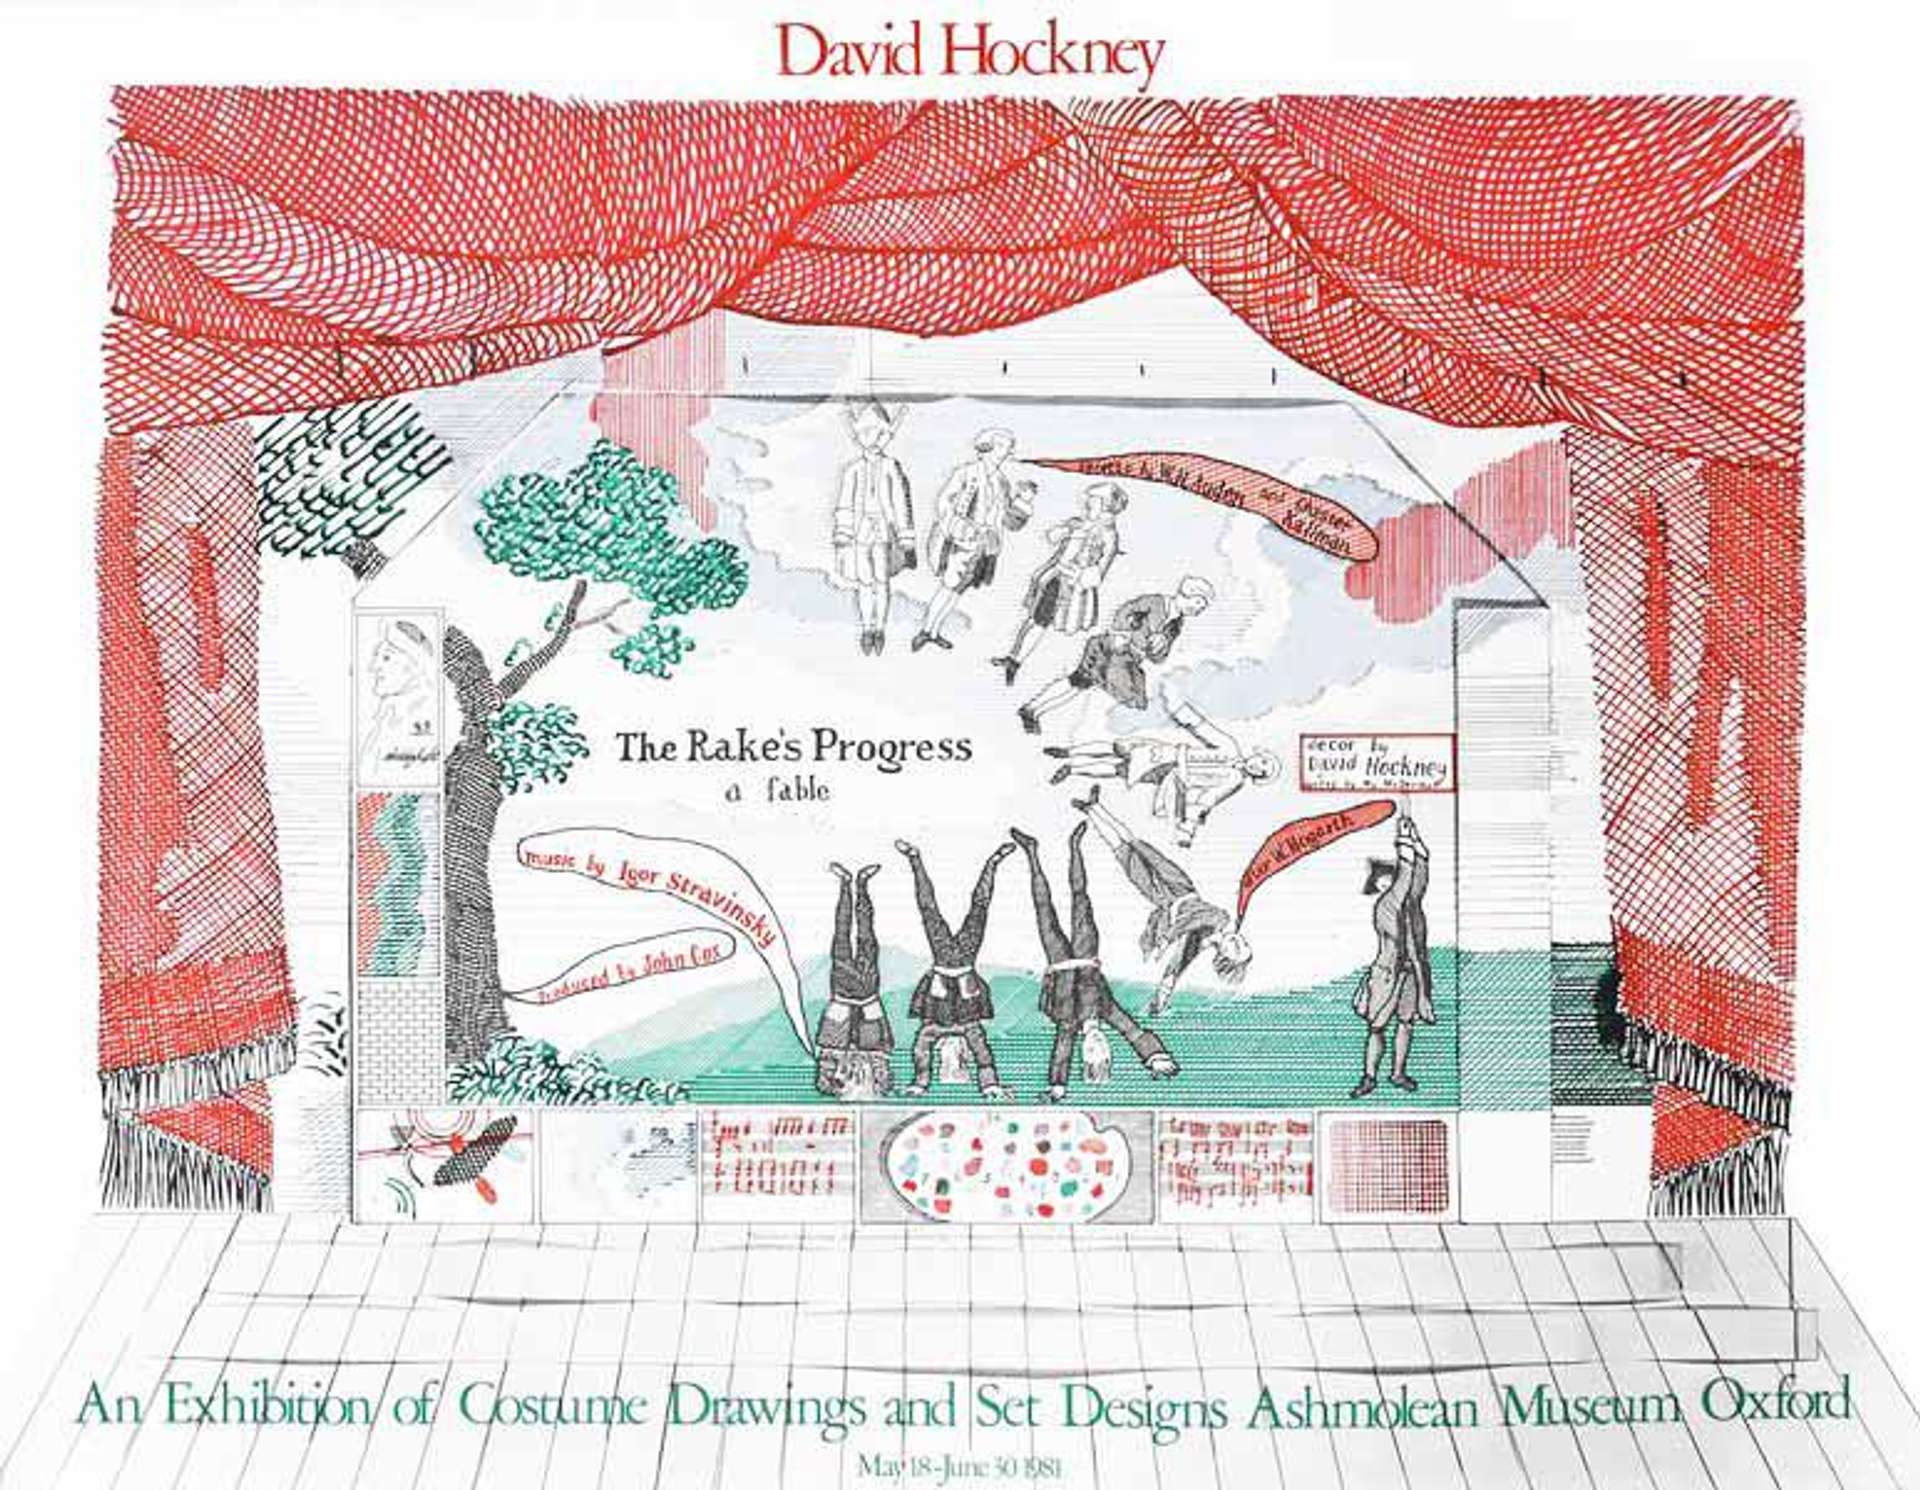 This print shows a stage framed by red curtains cross-hatched in Hockney's signature style. In the centre, the figures revolve and spin, while musical notes are shown underneath.